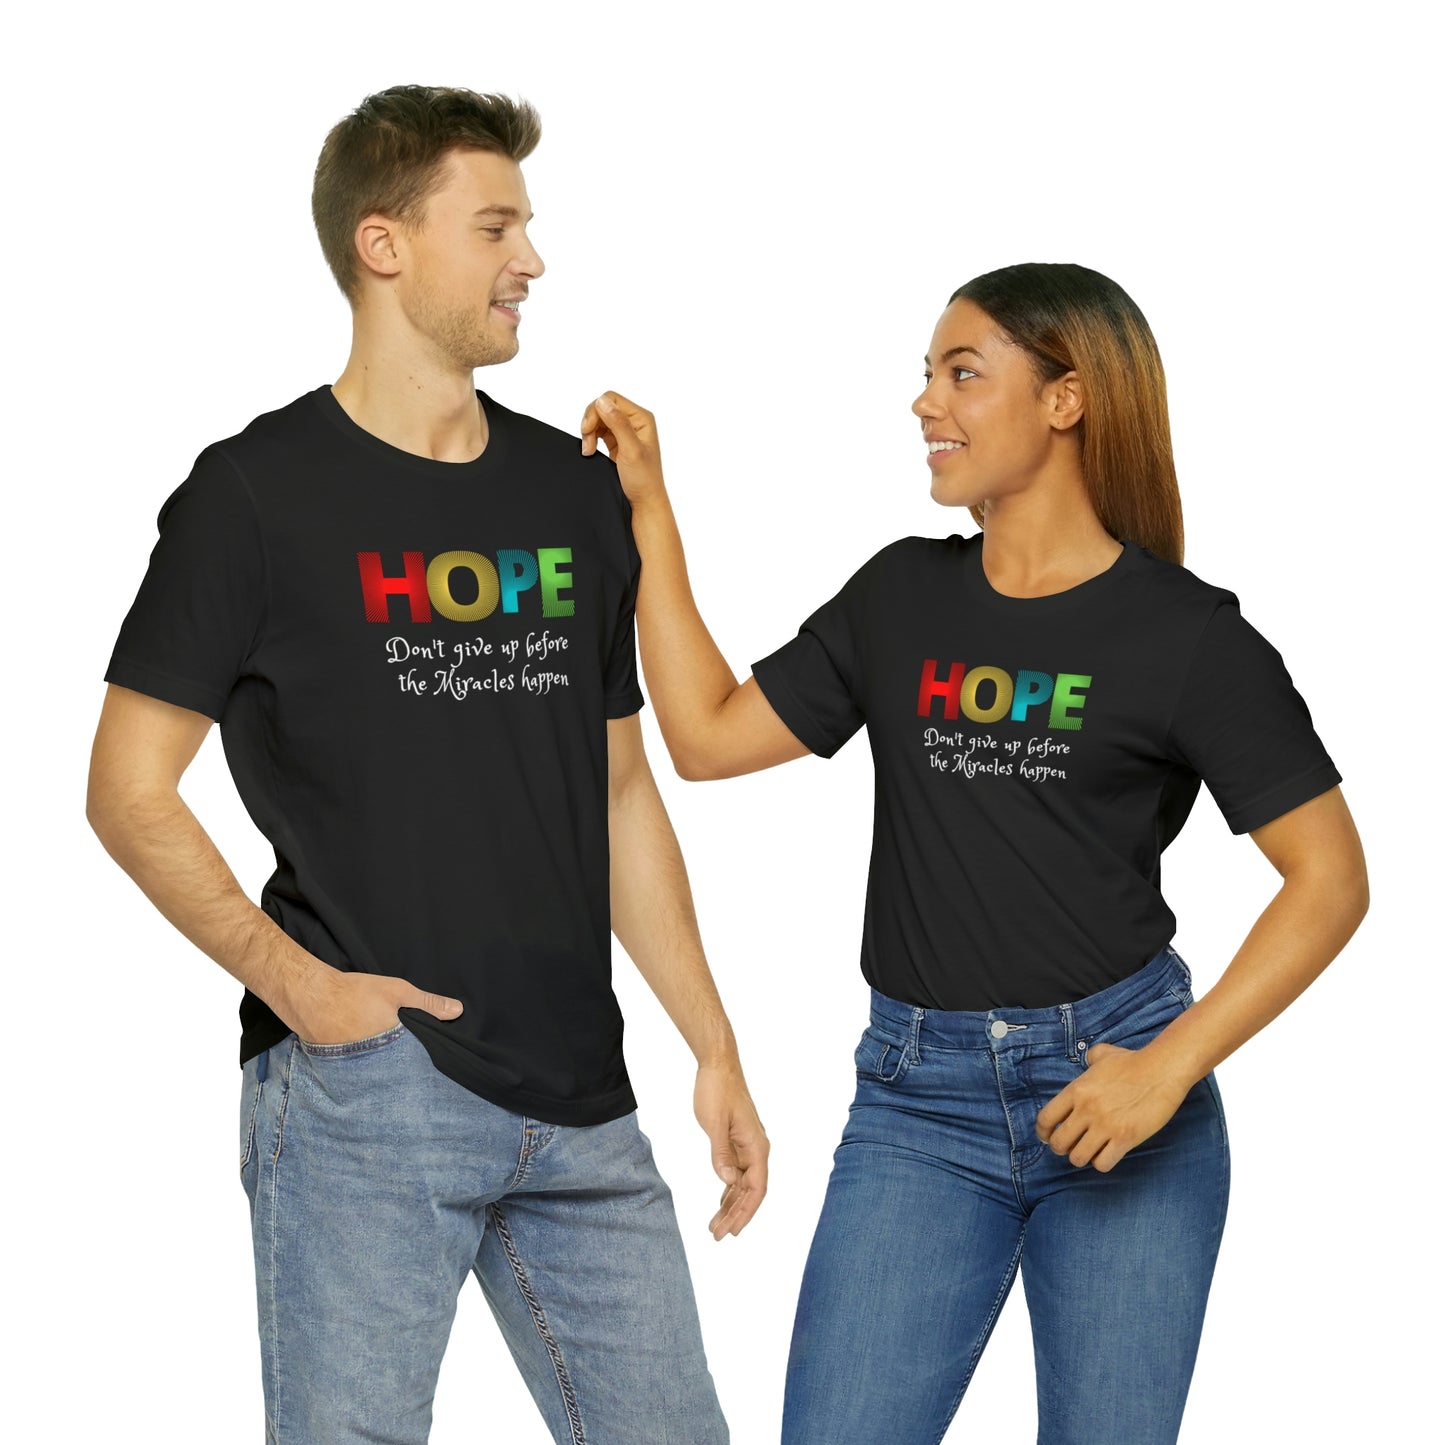 "HOPE Don't Give Up Before the Miracles Happen" Short Sleeve Unisex Tee